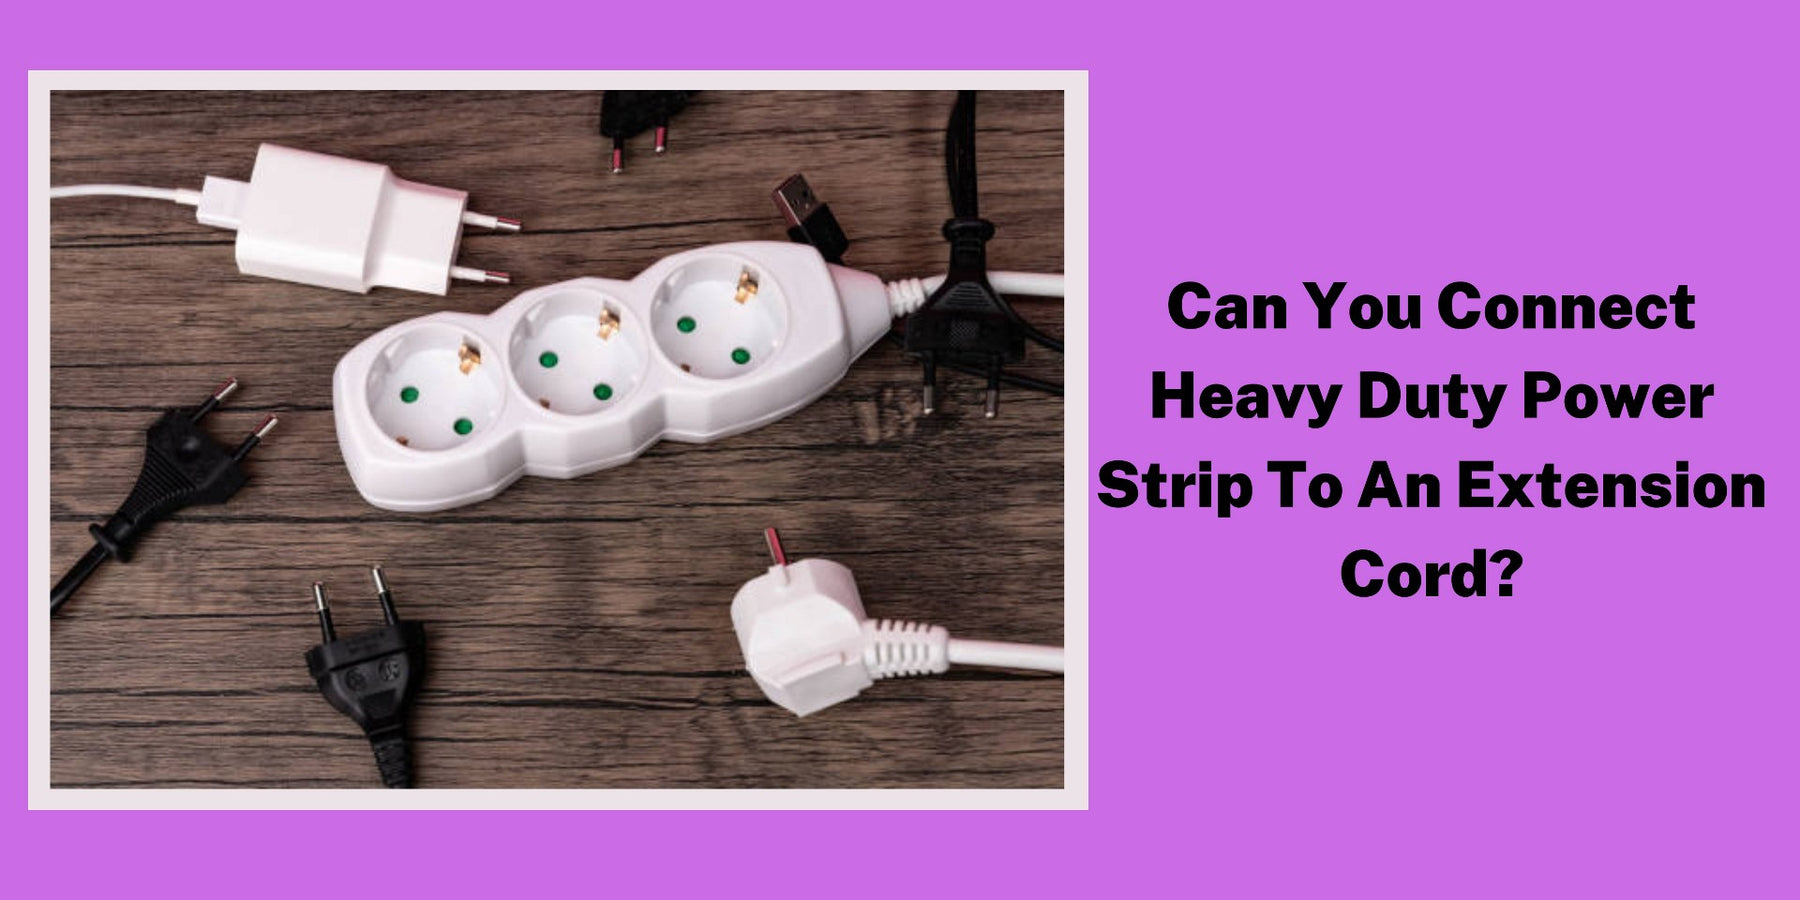 Can You Connect a Heavy Duty Power Strip to an Extension Cord?